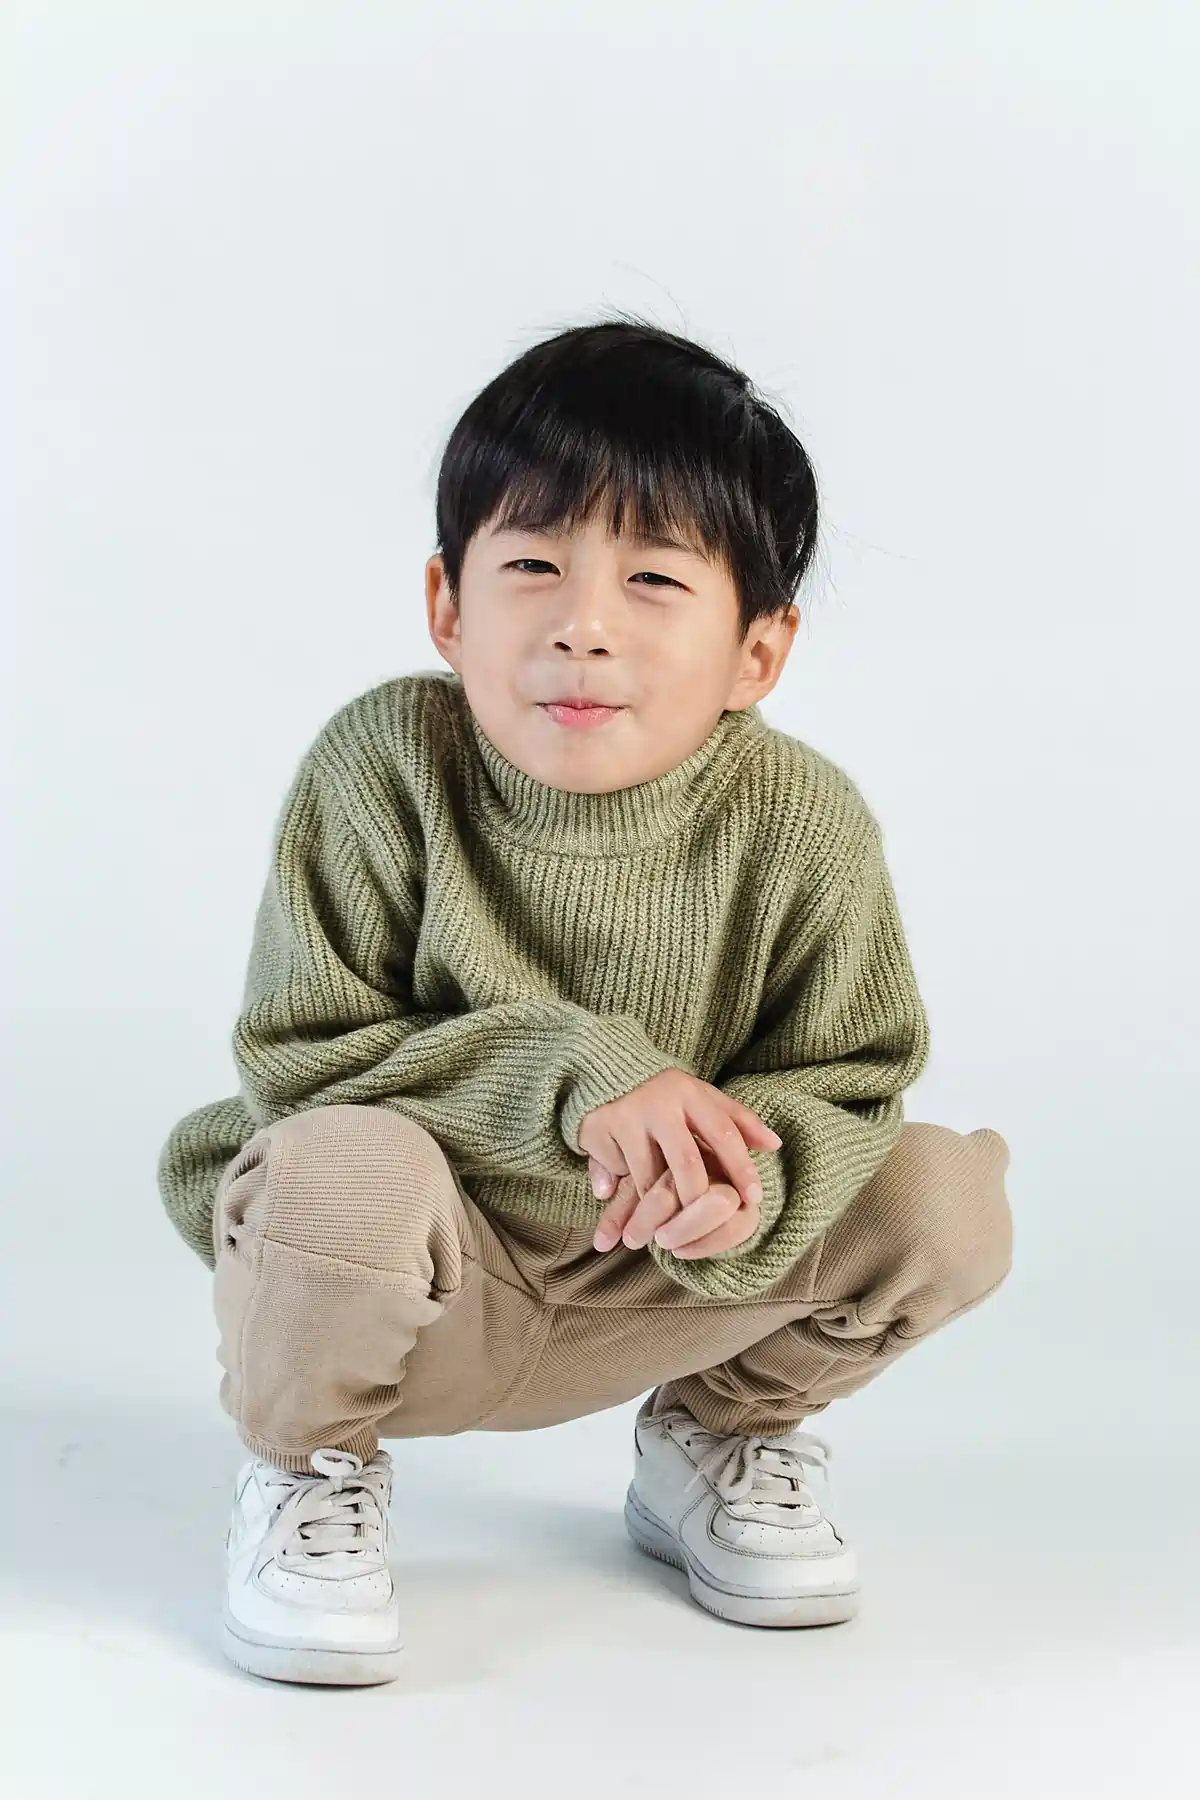 Young asian boy crouching and smiling during photoshoot.